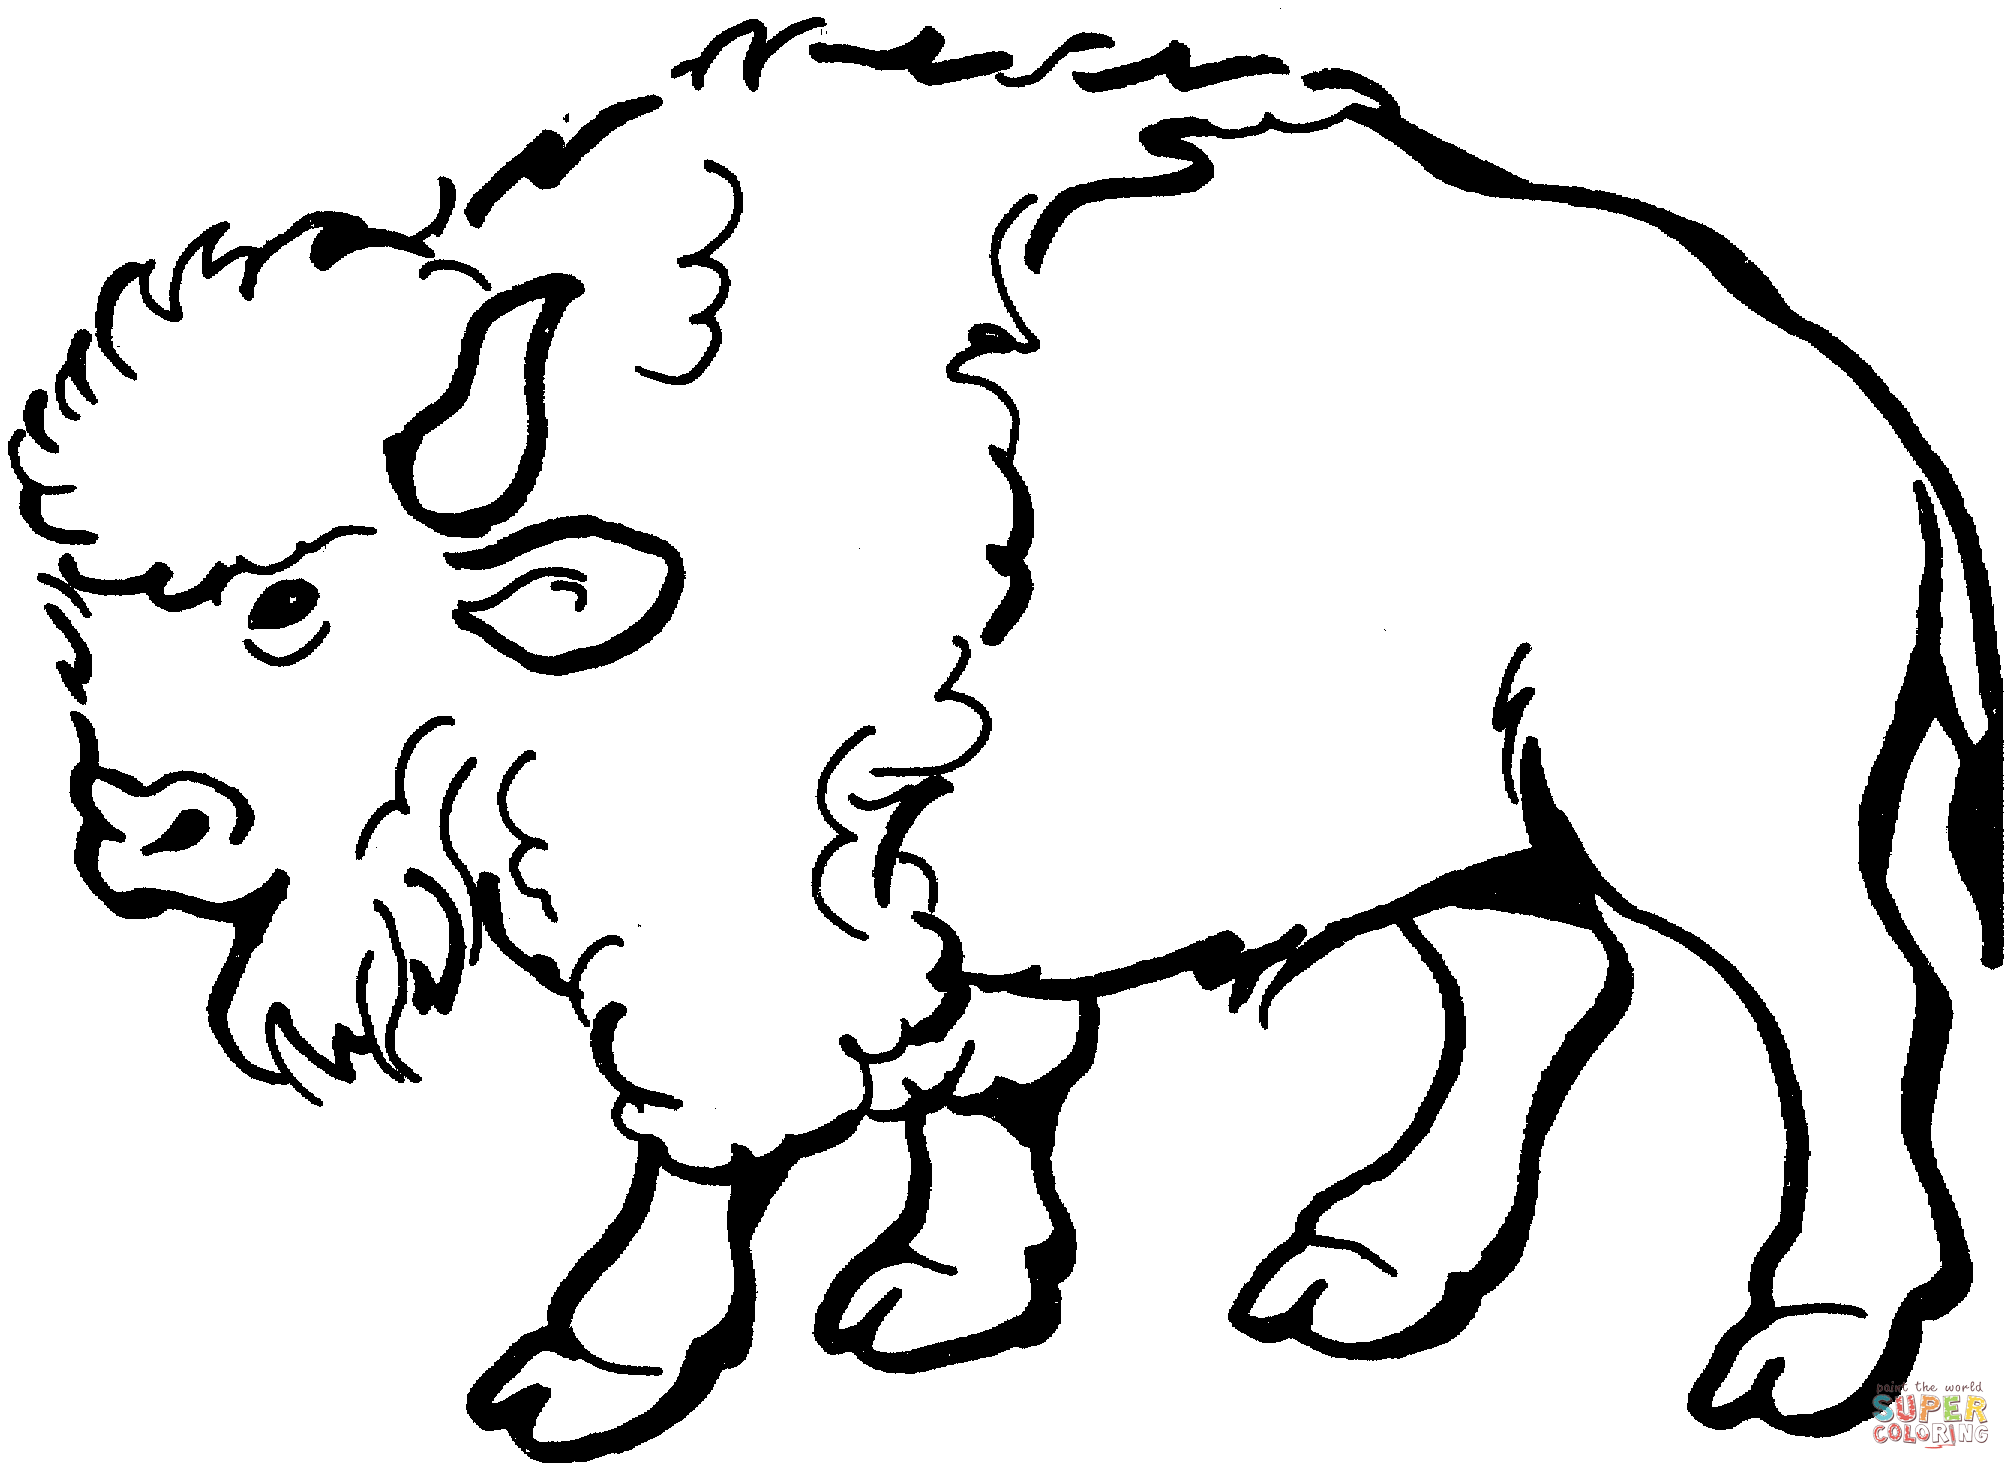 Bison coloring page free printable coloring pages